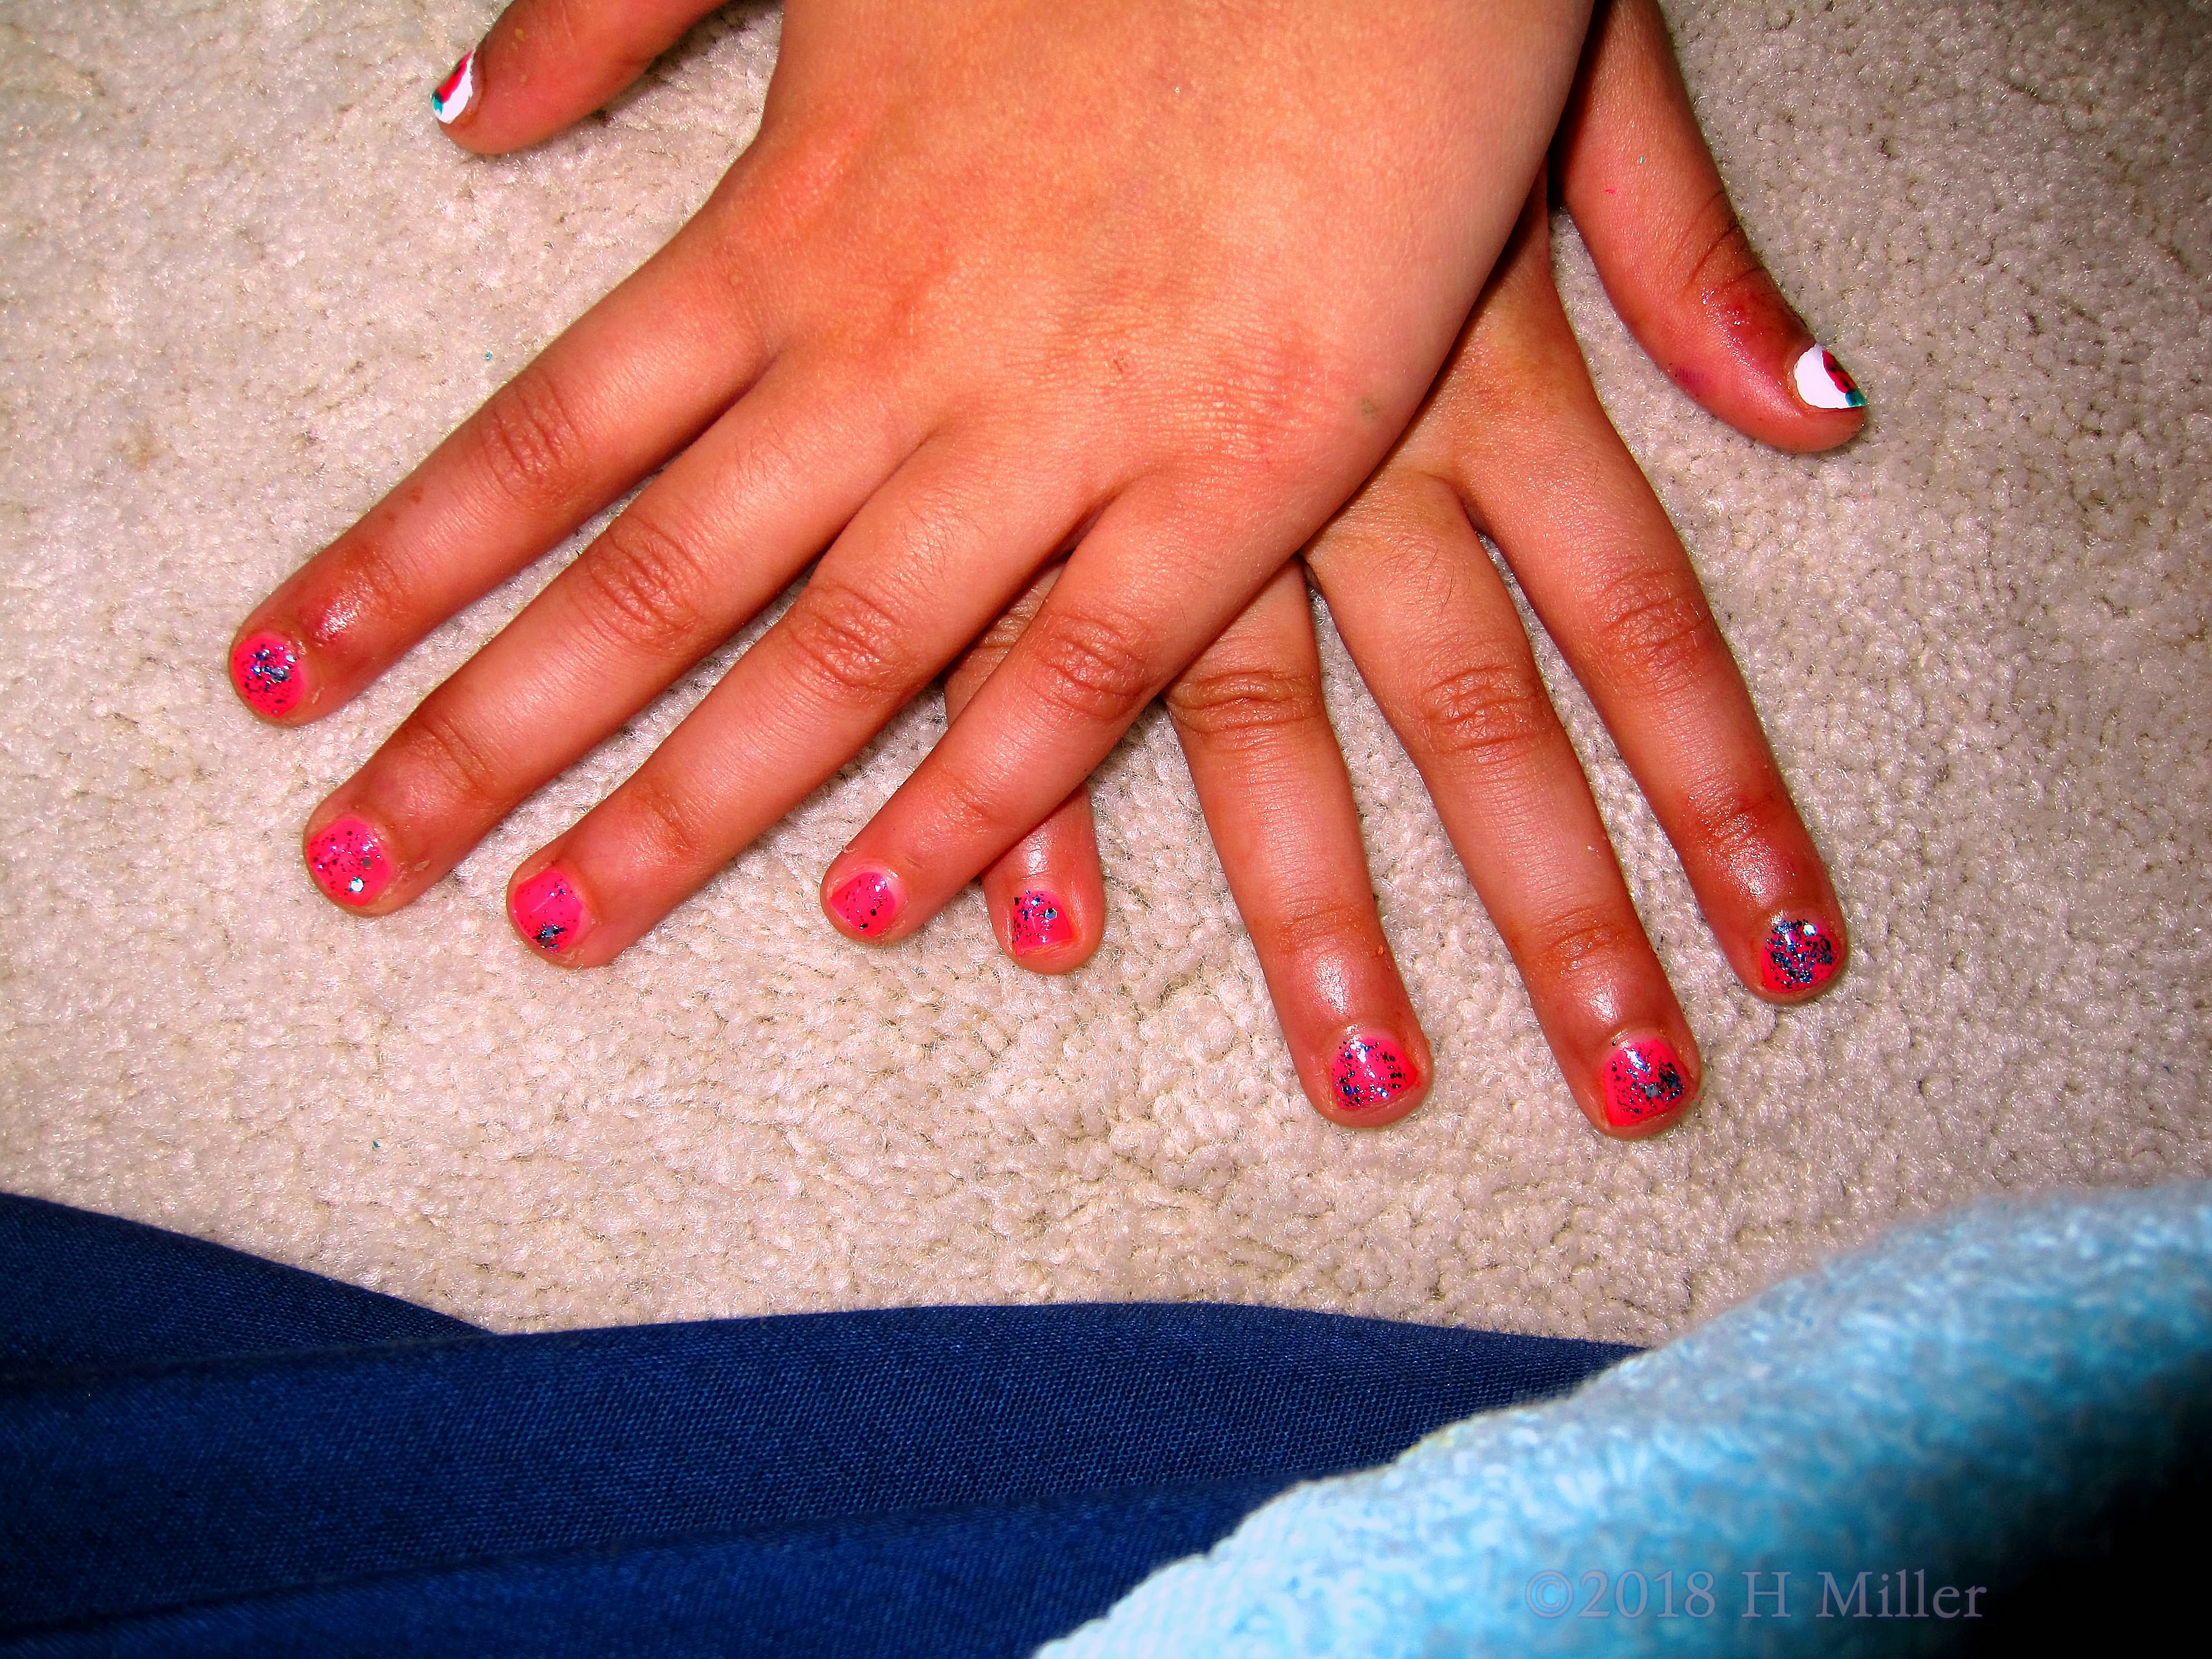 Strawberry Nail Art With Glittery Pink Nail Color. 